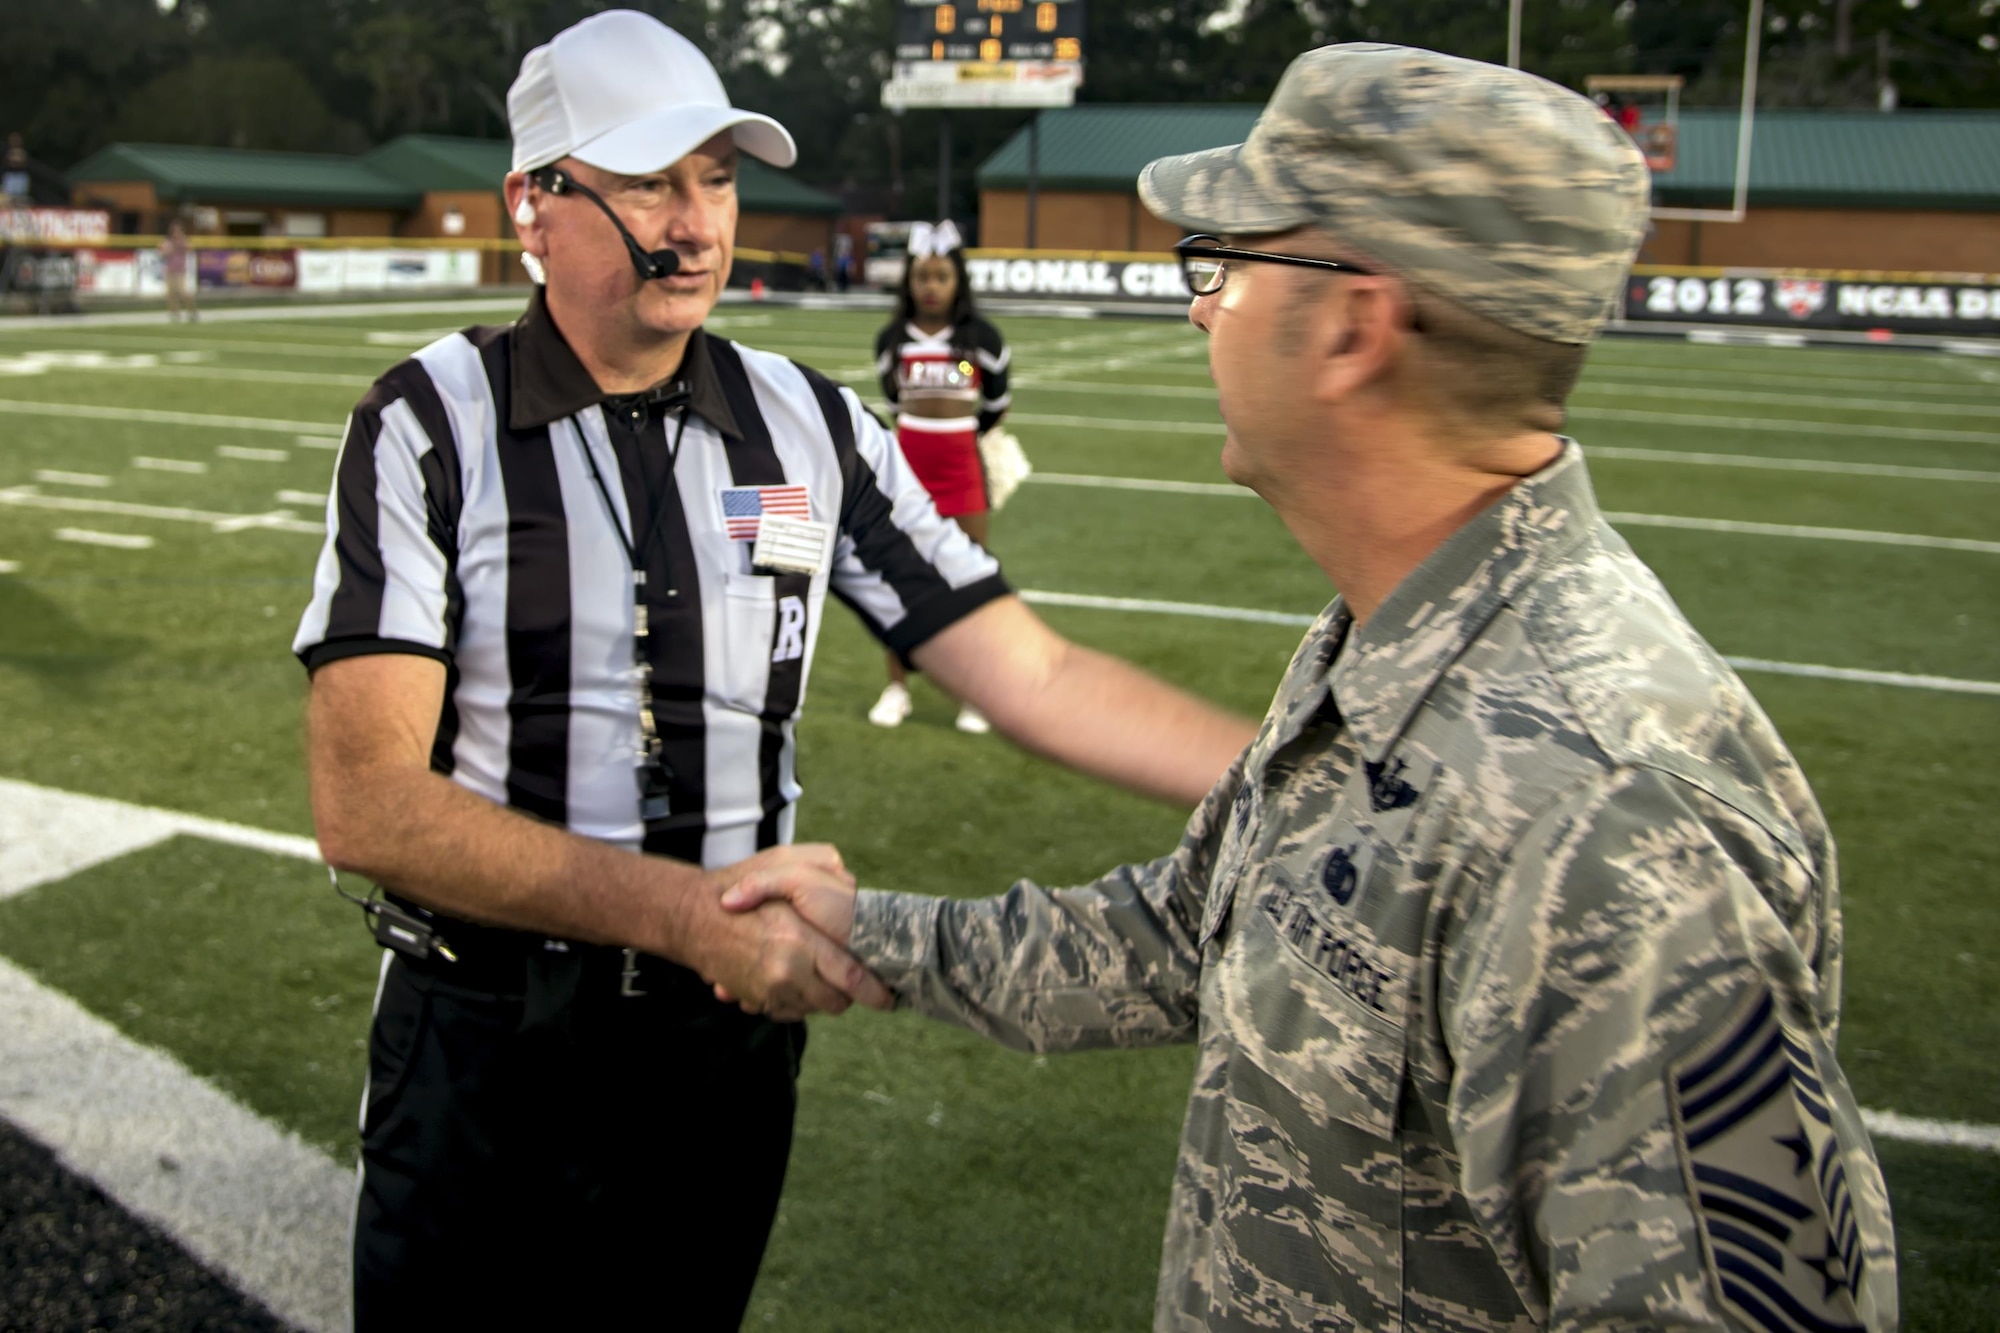 Chief Master Sgt. Jarrod Sebastian, 23d Wing command chief, receives a coin from Michael Lester, college football referee, prior to a military appreciation day game, Oct. 15, 2017, in Valdosta, Ga. Active-duty and retired military members received free admission into the game as appreciation for their service. (U.S. Air Force photo by Airman Eugene Oliver)